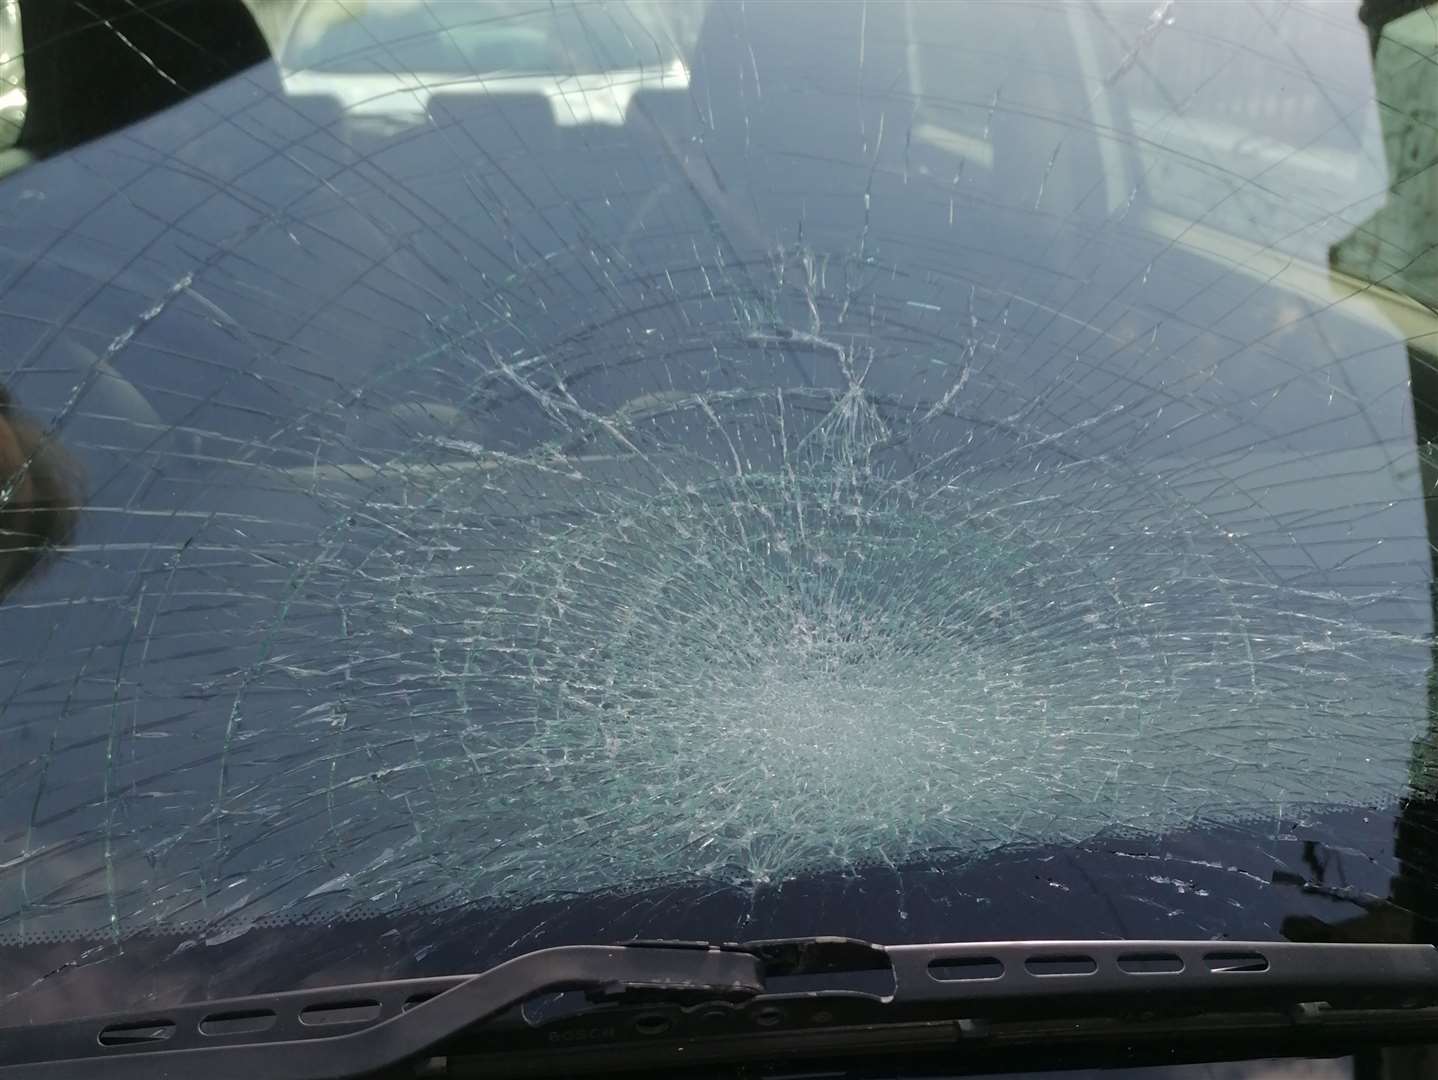 Car wind screens were smashed during the rampage